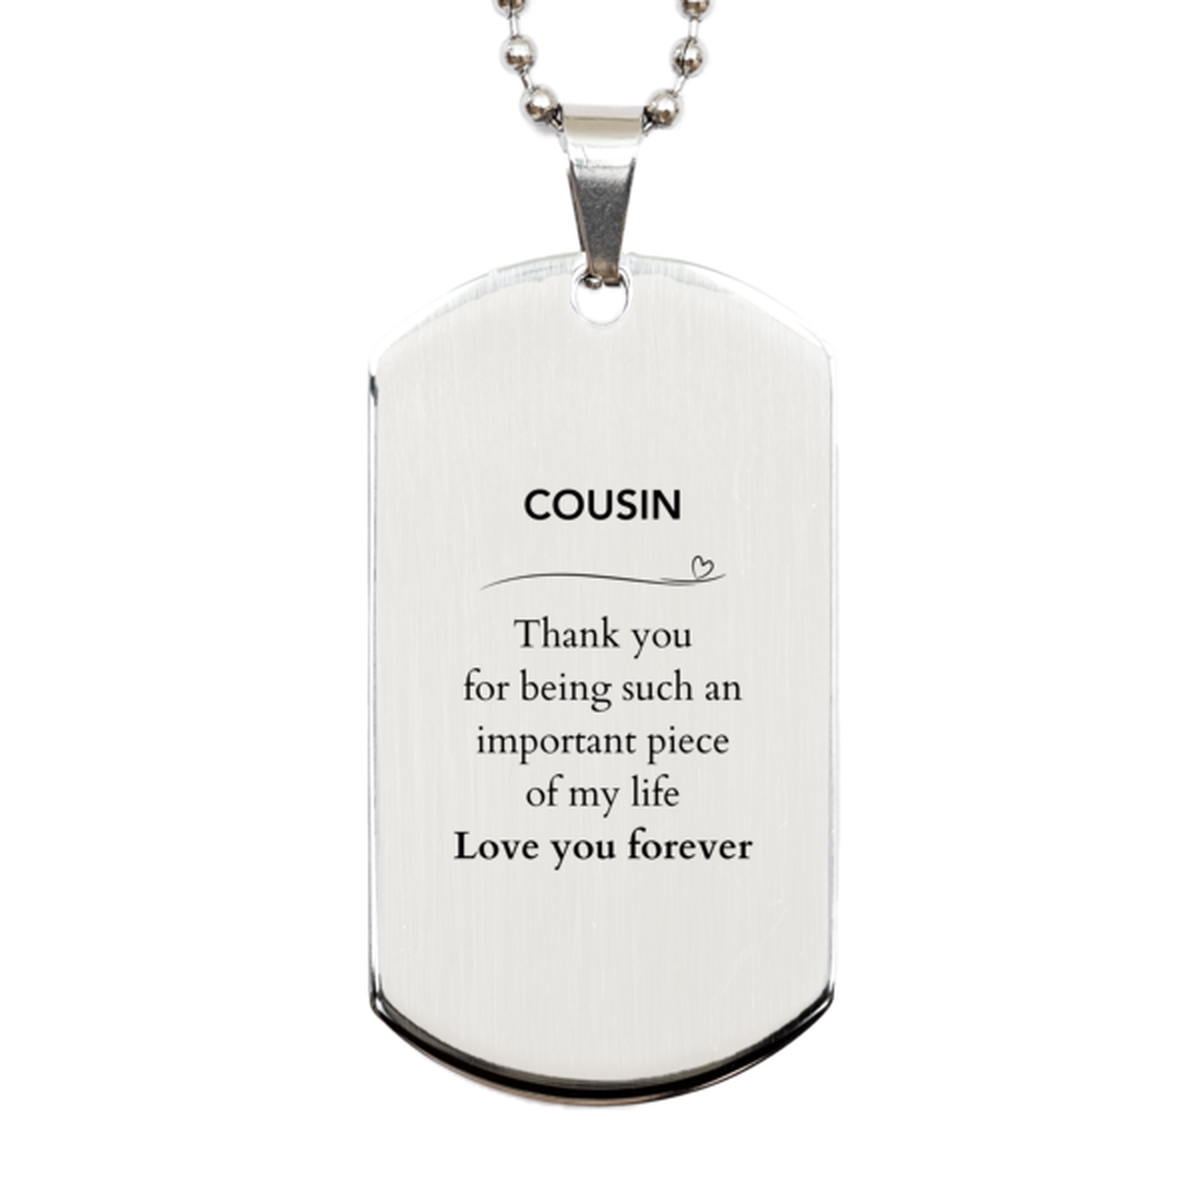 Appropriate Cousin Silver Dog Tag Epic Birthday Gifts for Cousin Thank you for being such an important piece of my life Cousin Christmas Mothers Fathers Day